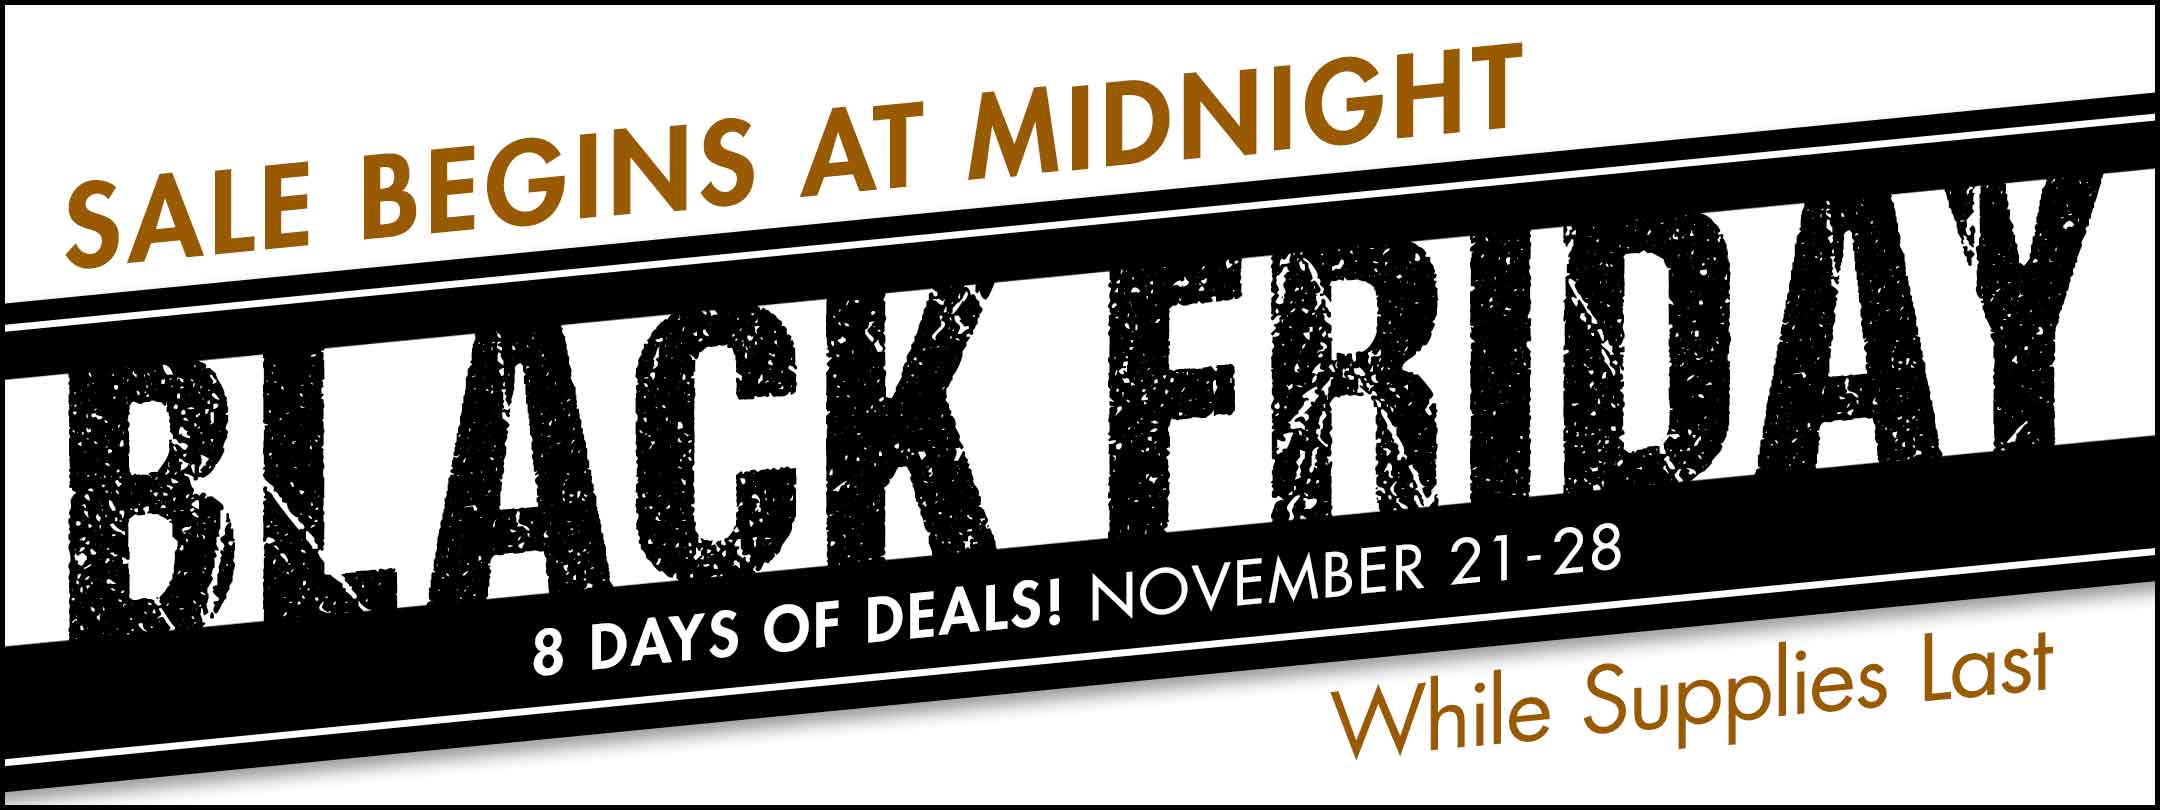 MidwayUSA Black Friday sale starting now (Midnight Central Time)